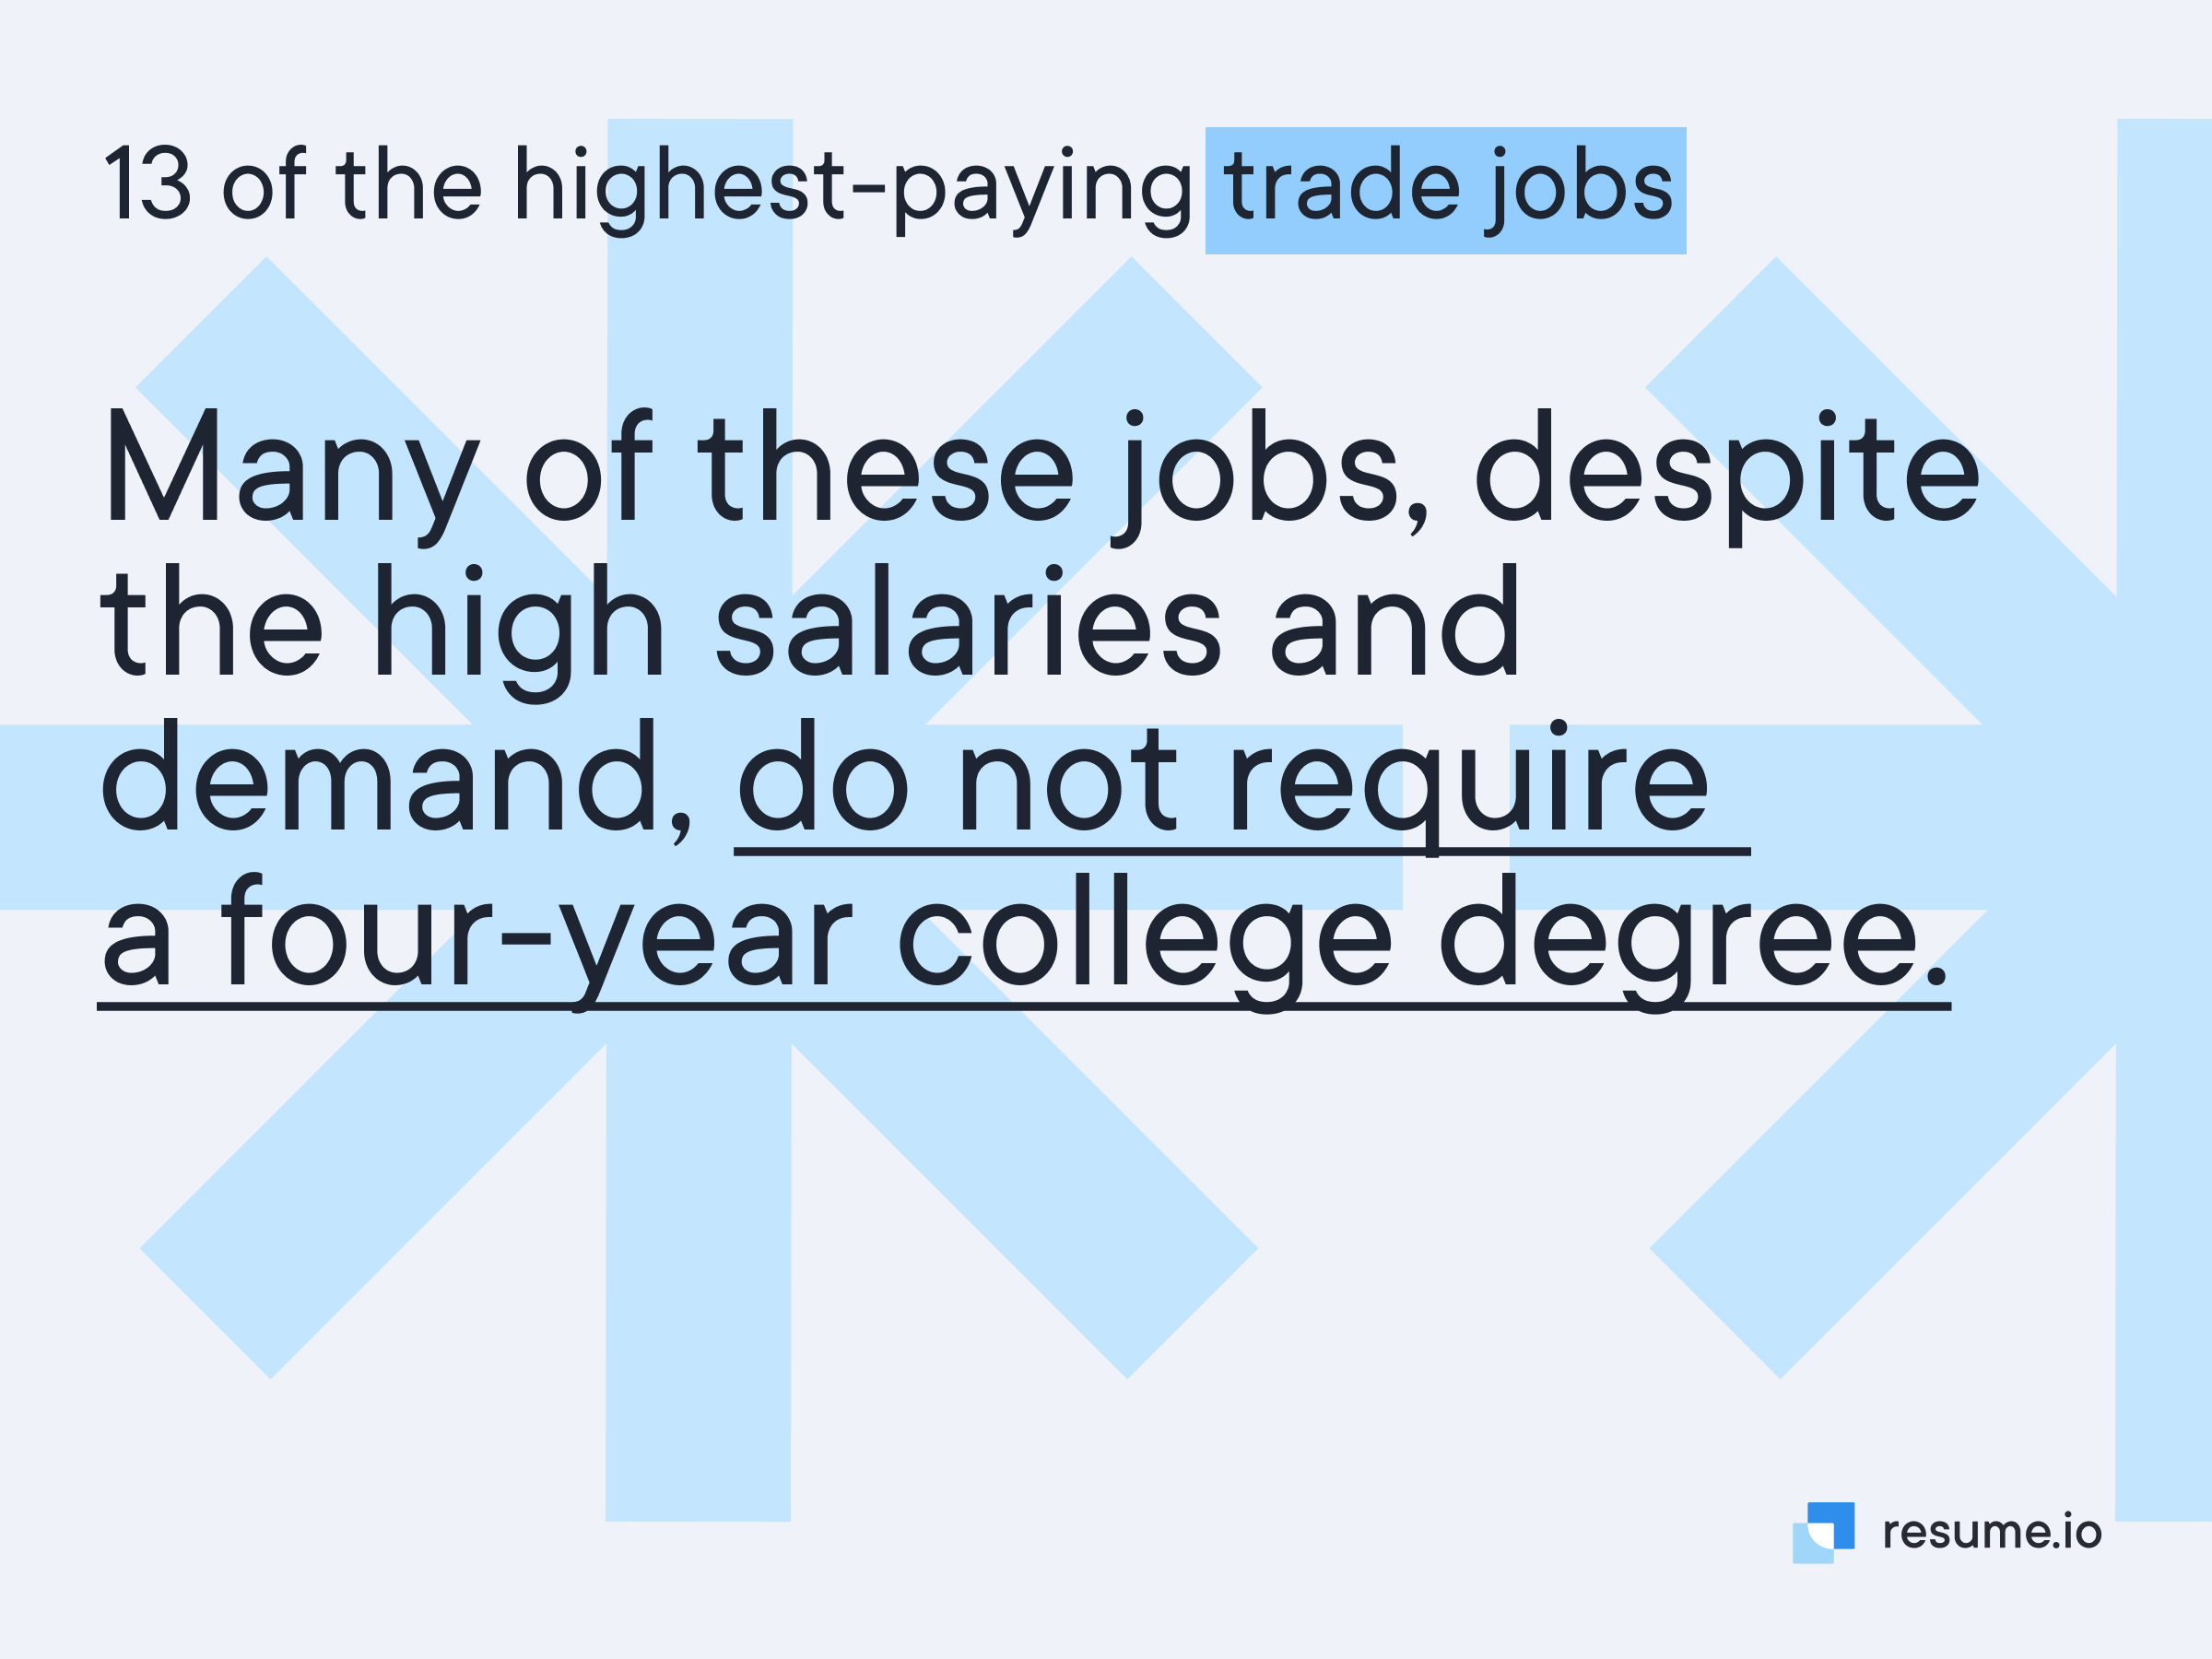 Many high-paying jobs do not require a four-year college degree